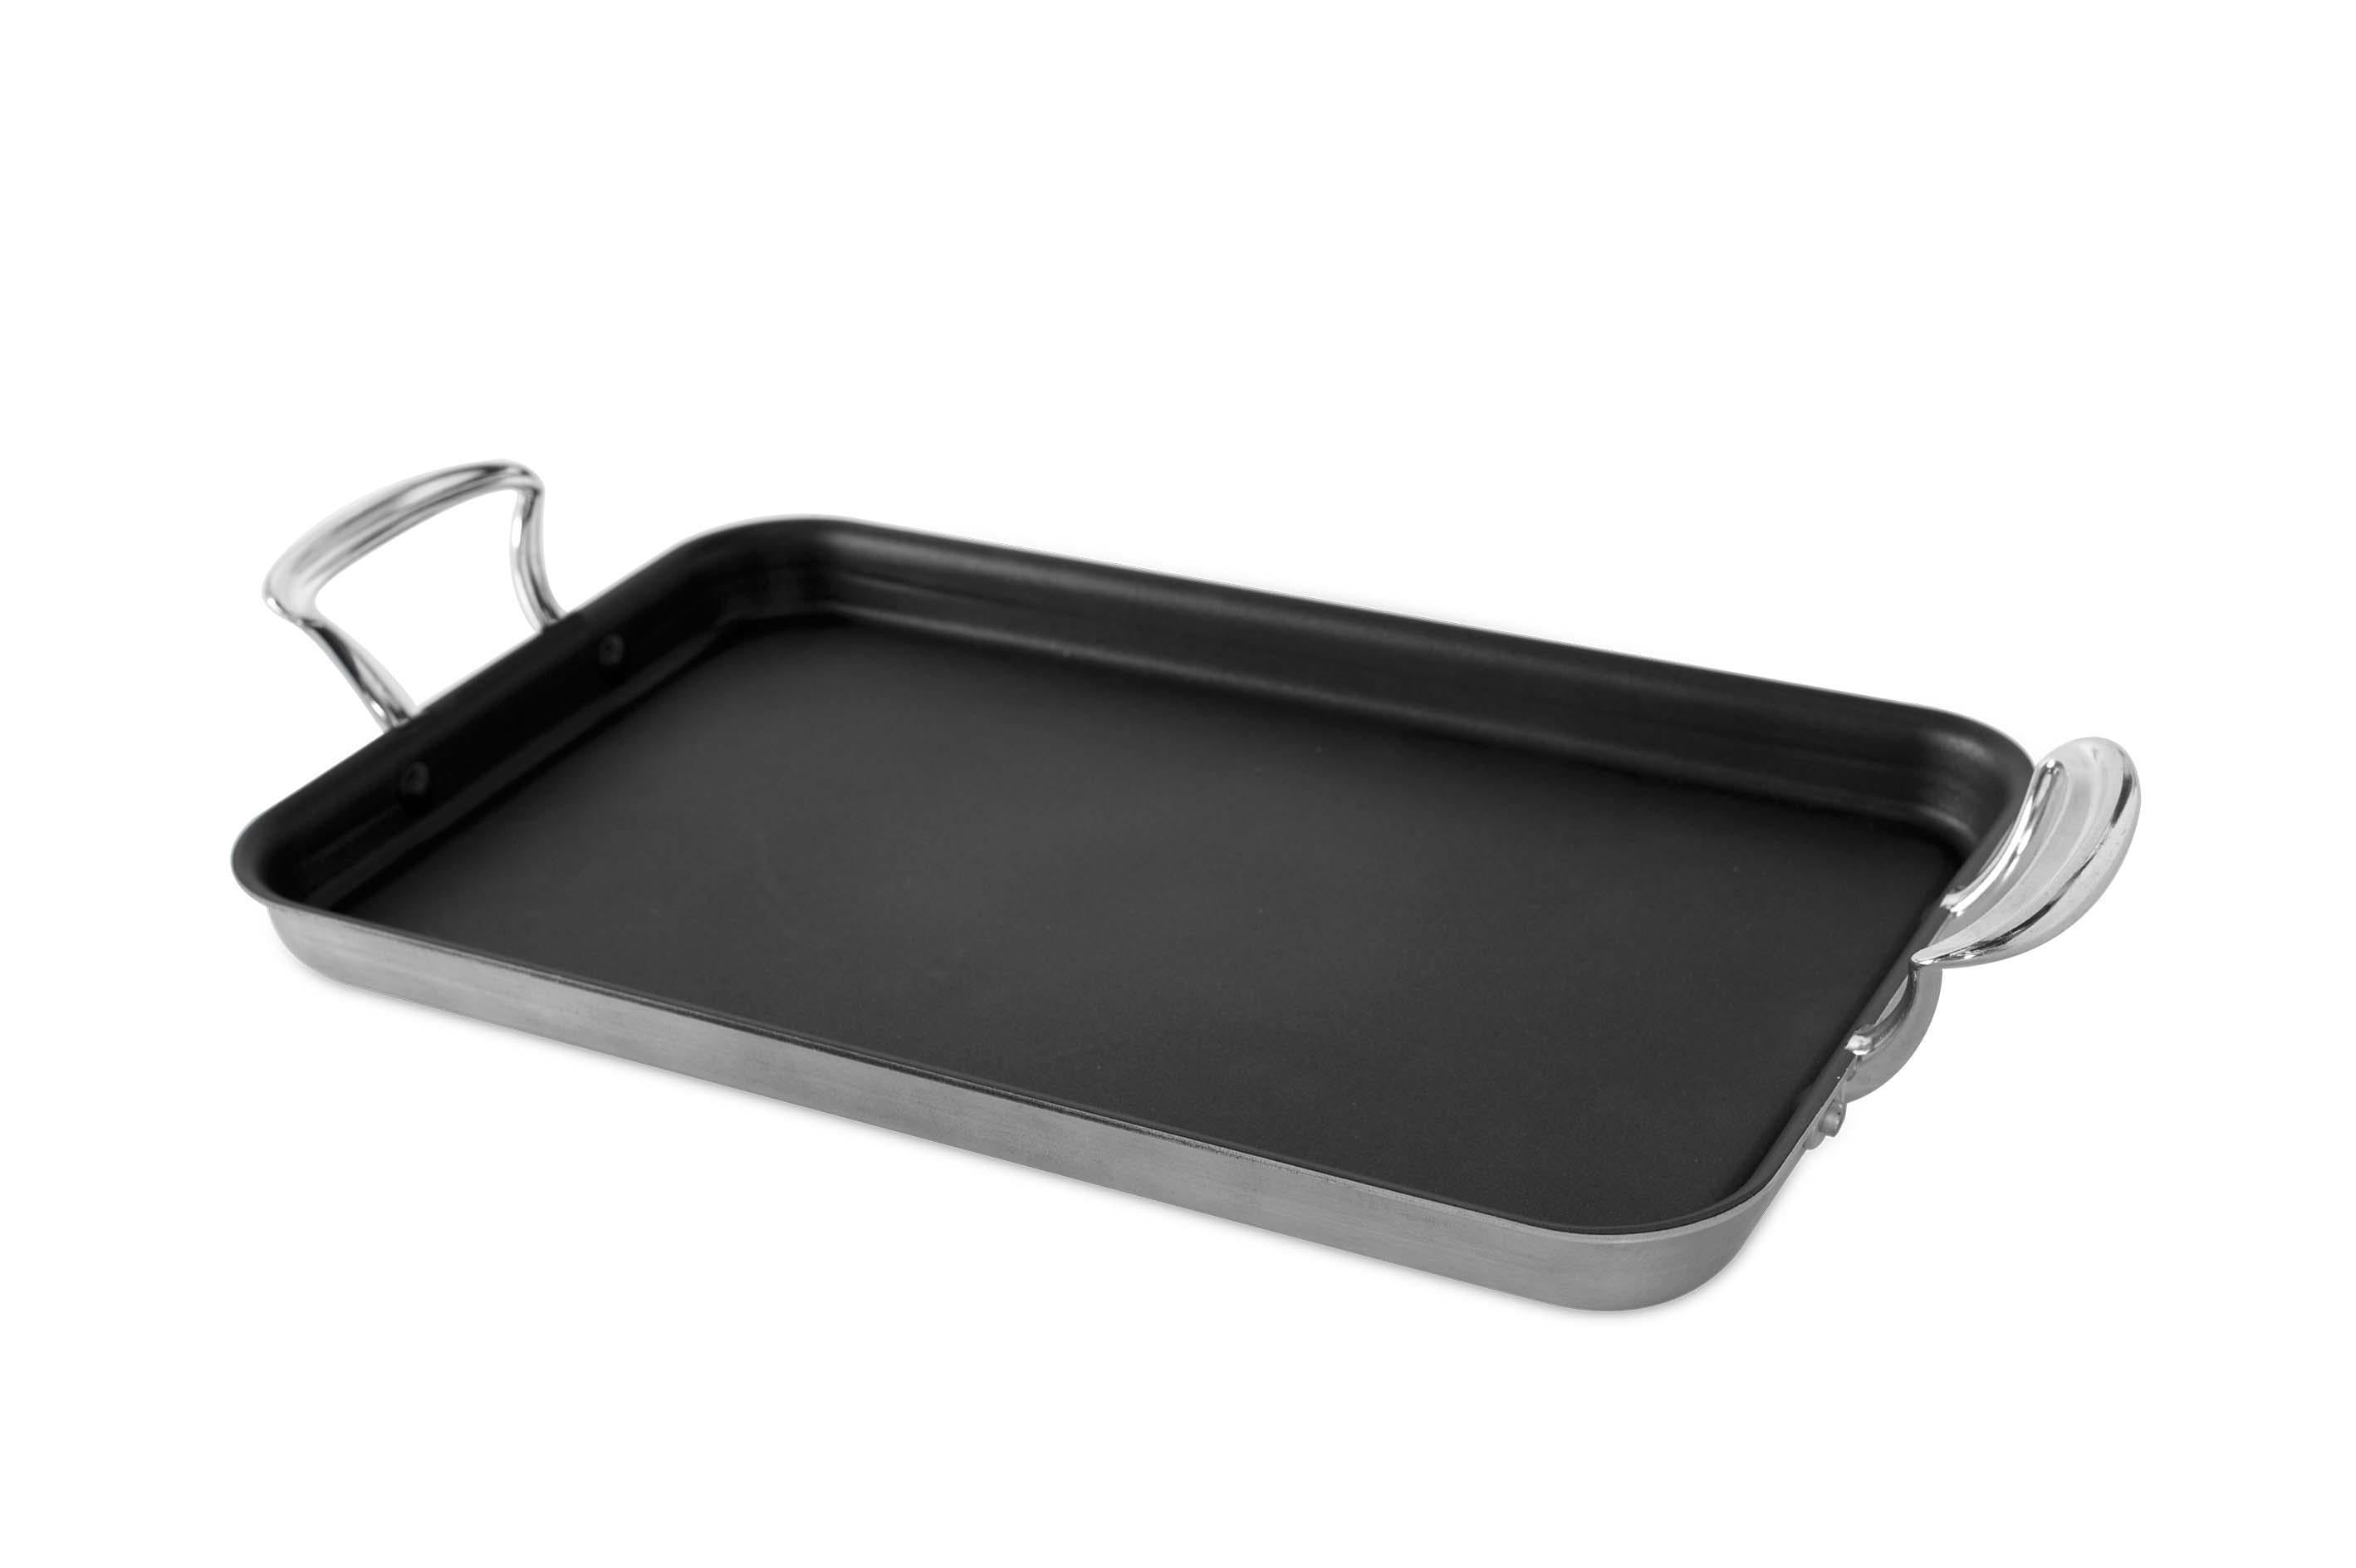 Nordic Ware Two Burner High-Sided Griddle - 20